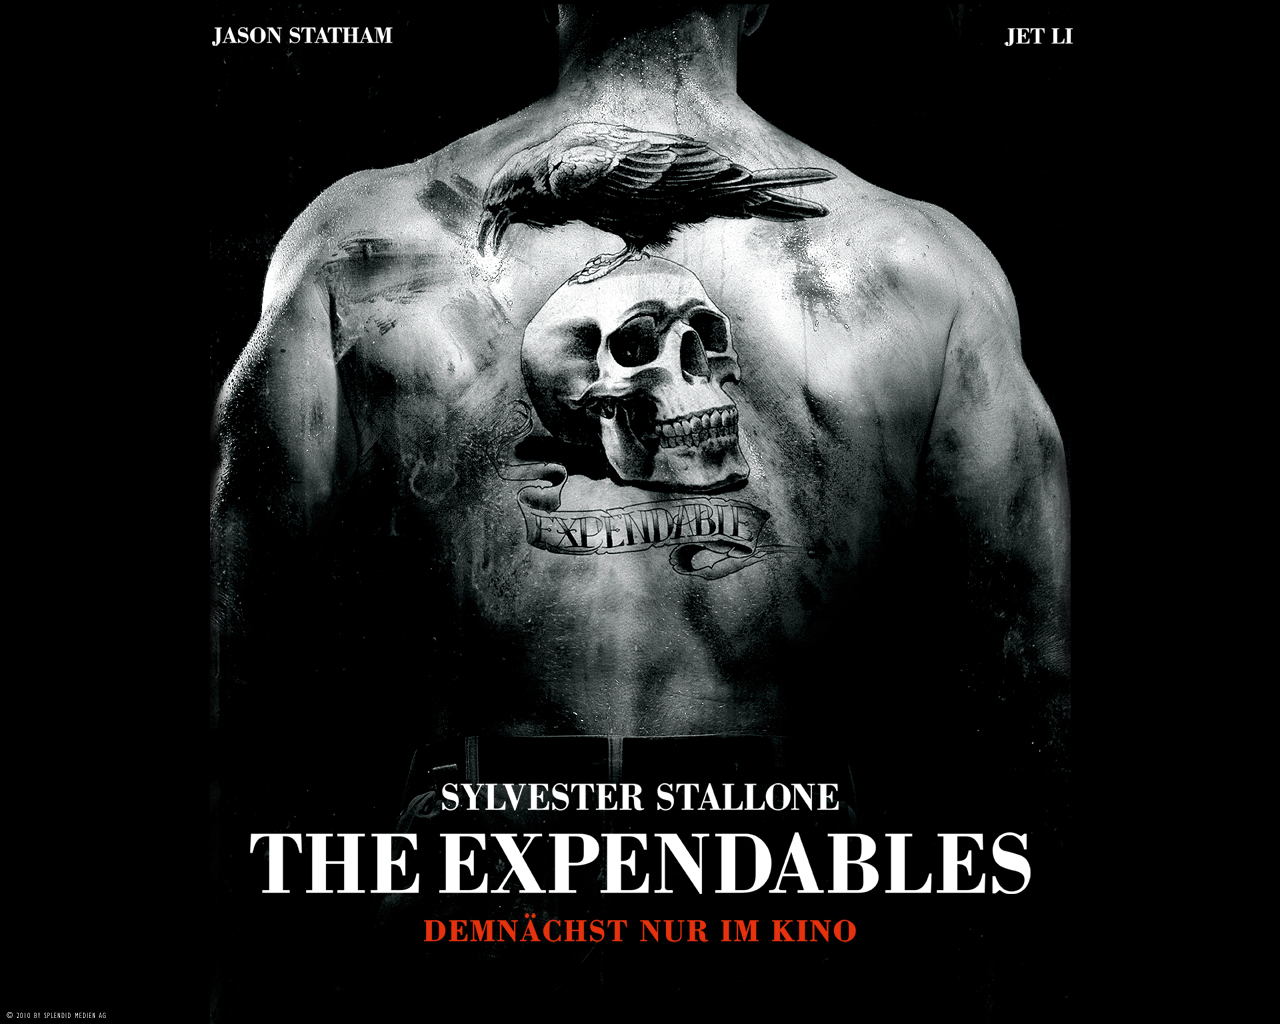 Download High quality back with tattoo The Expendables wallpaper / 1280x1024